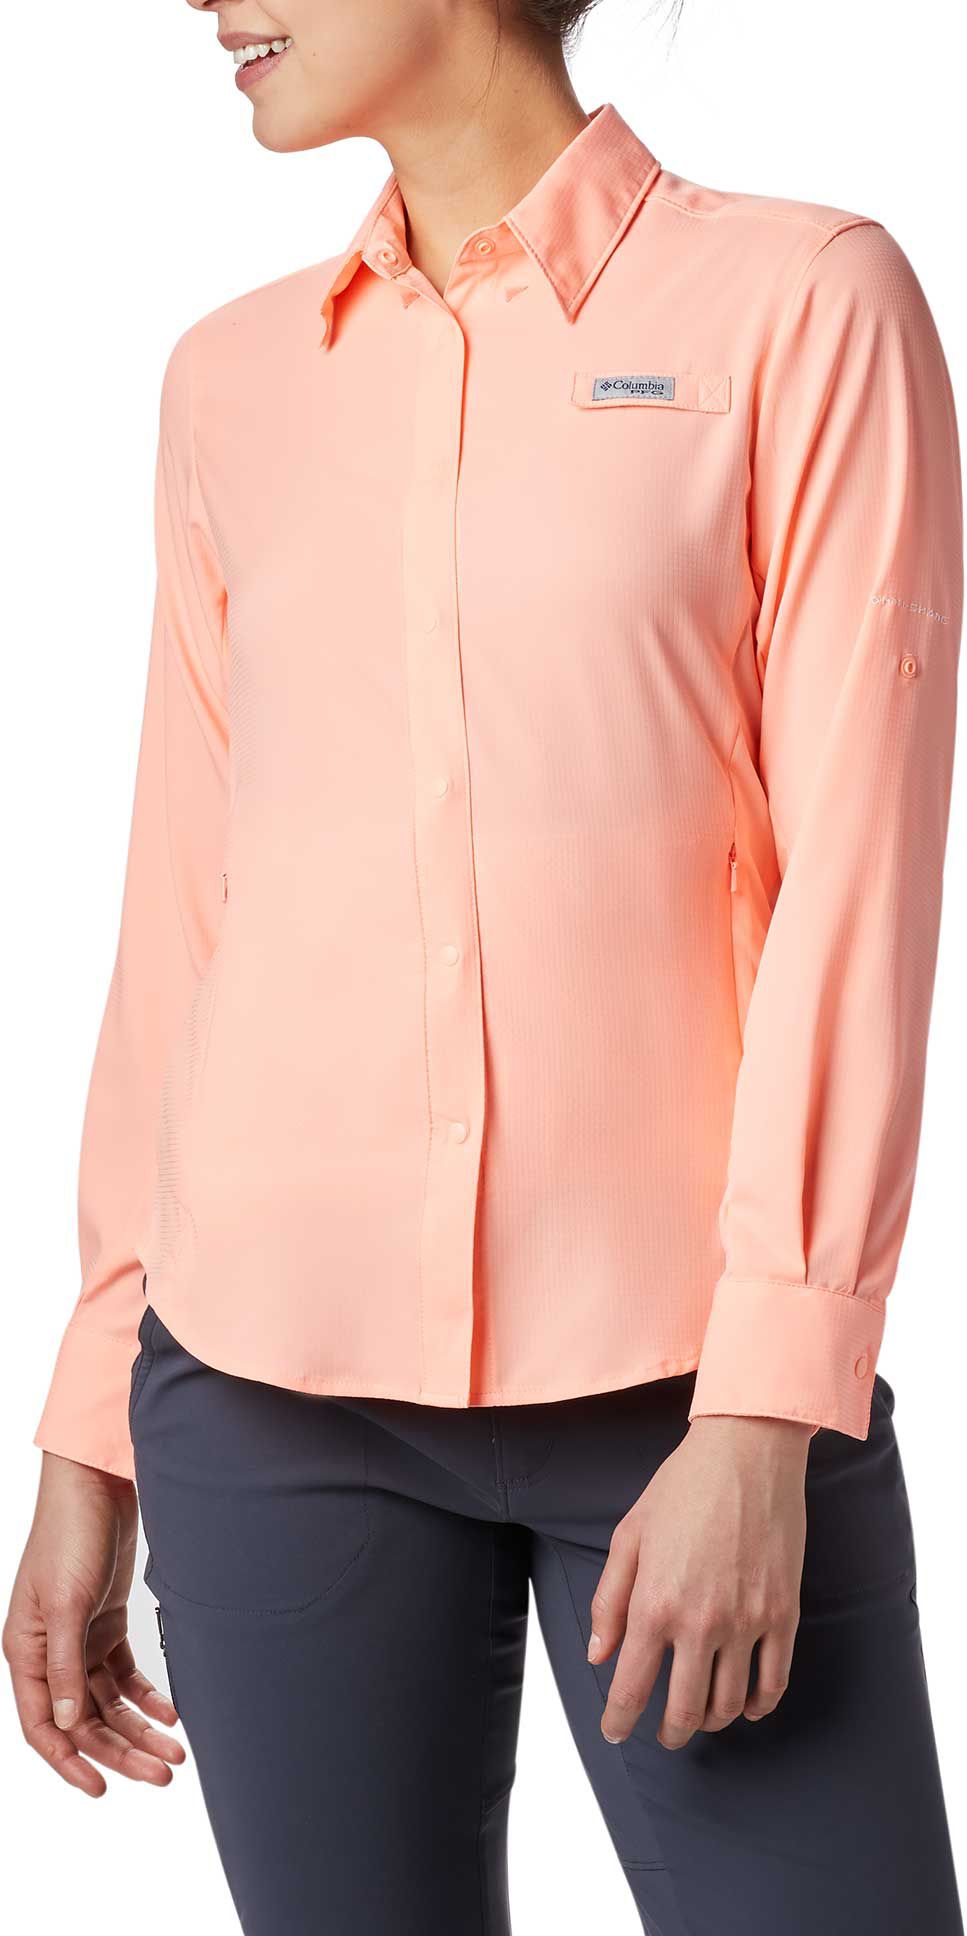 pink columbia fishing shirtThe Best Inexpensive Online Clothing